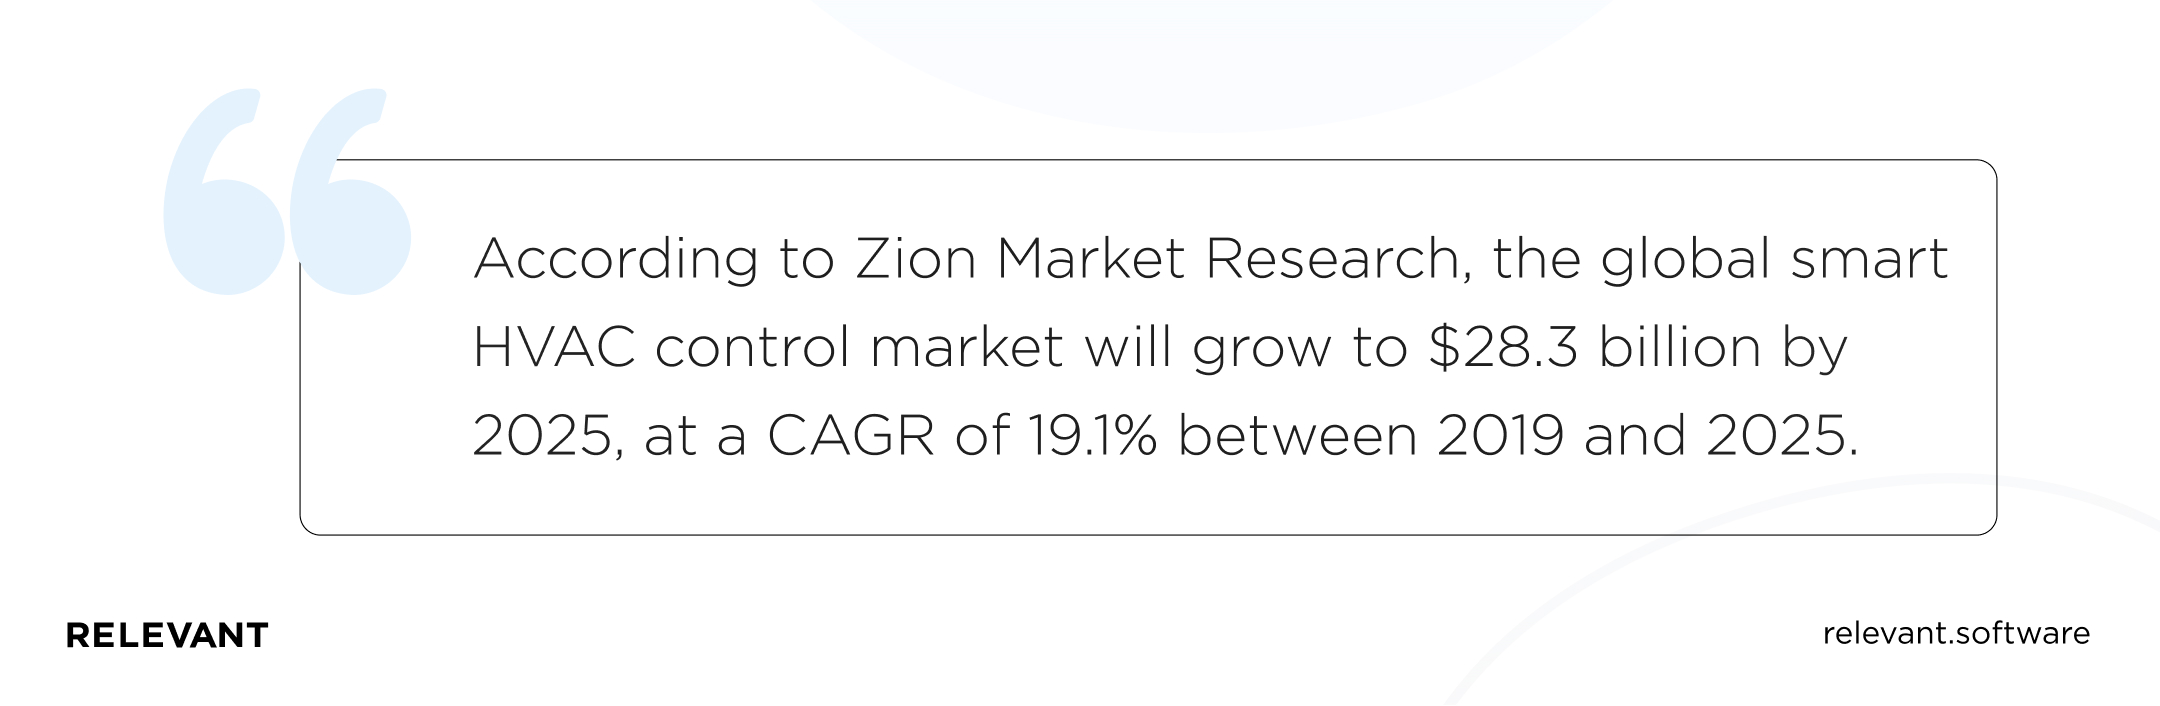 According to Zion Market Research, the global smart HVAC control market will grow to .3 billion by 2025, at a CAGR of 19.1% between 2019 and 2025.